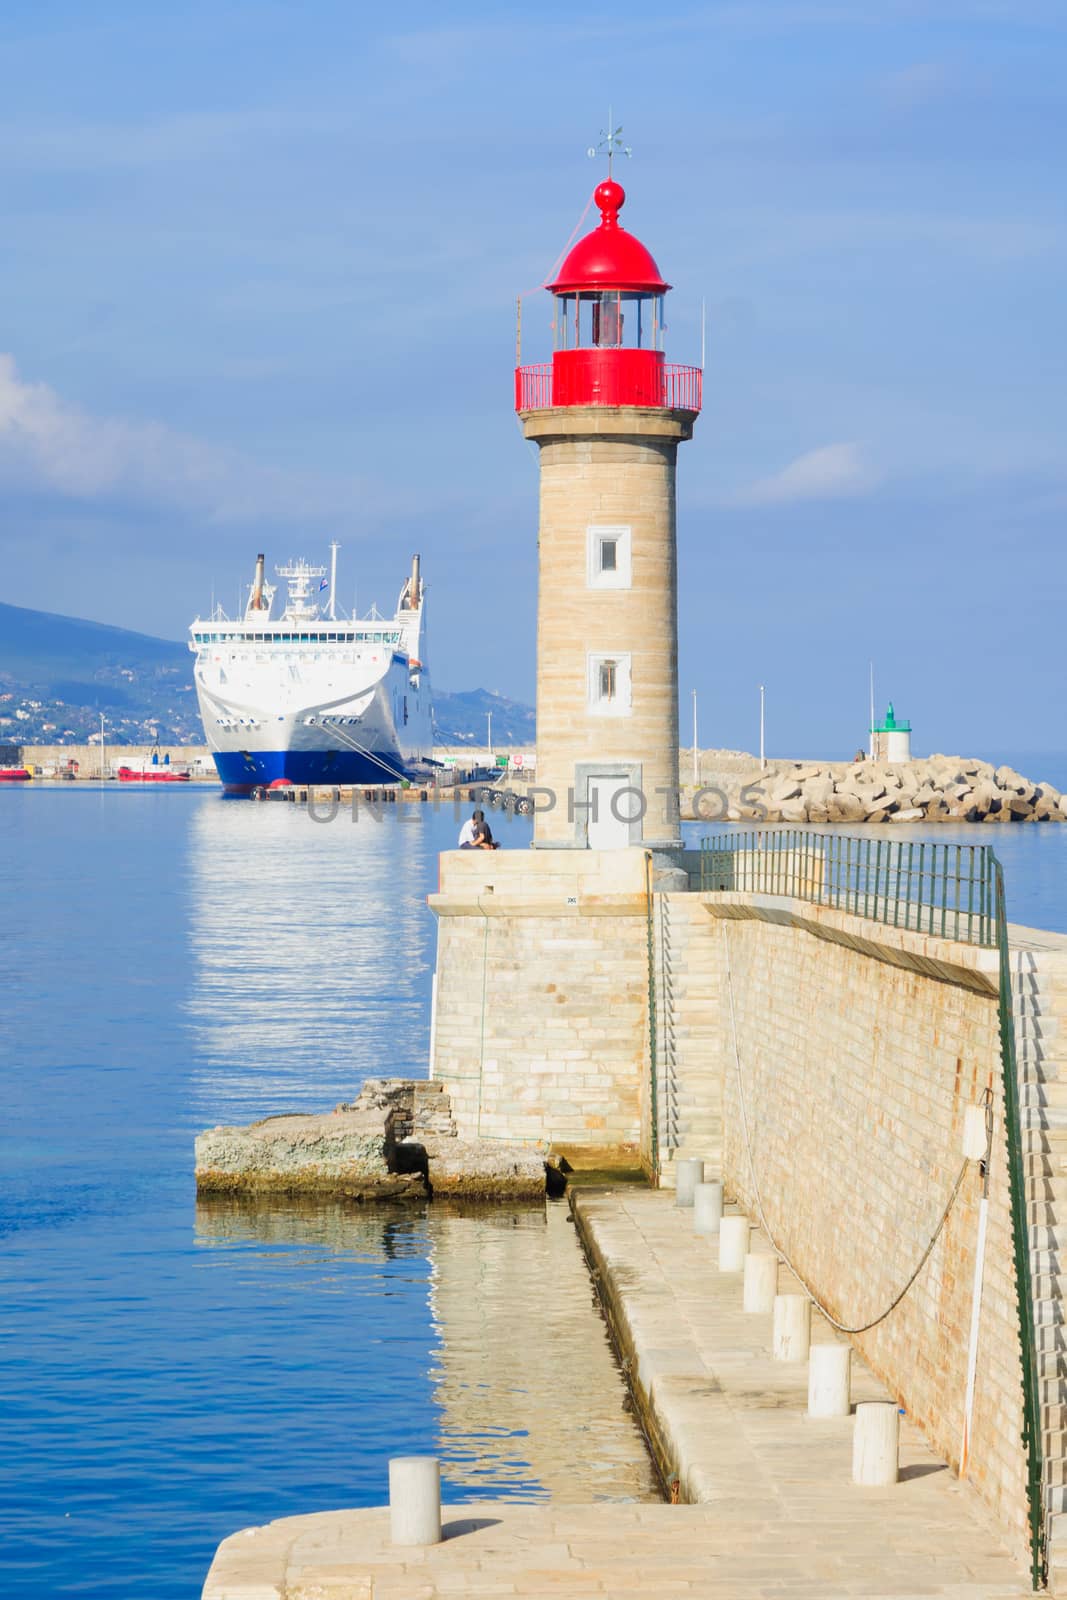 The commercial port entrance, in Bastia, Corsica, France